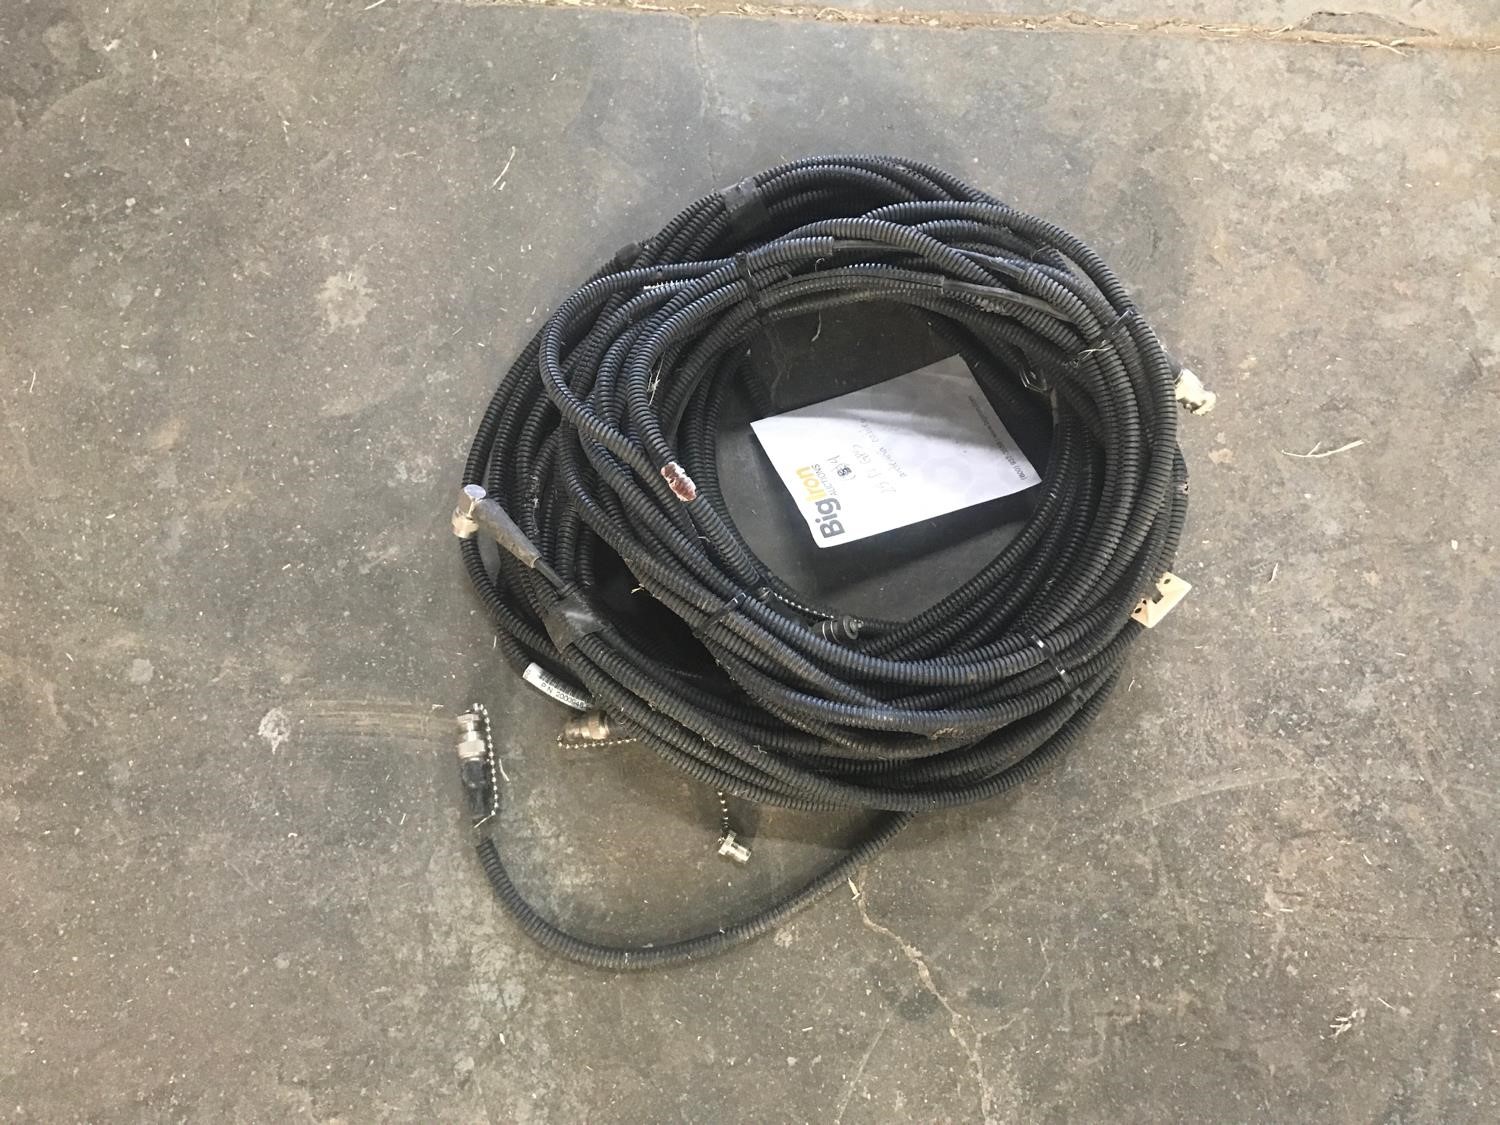 GPS Antenna Cables BigIron Auctions